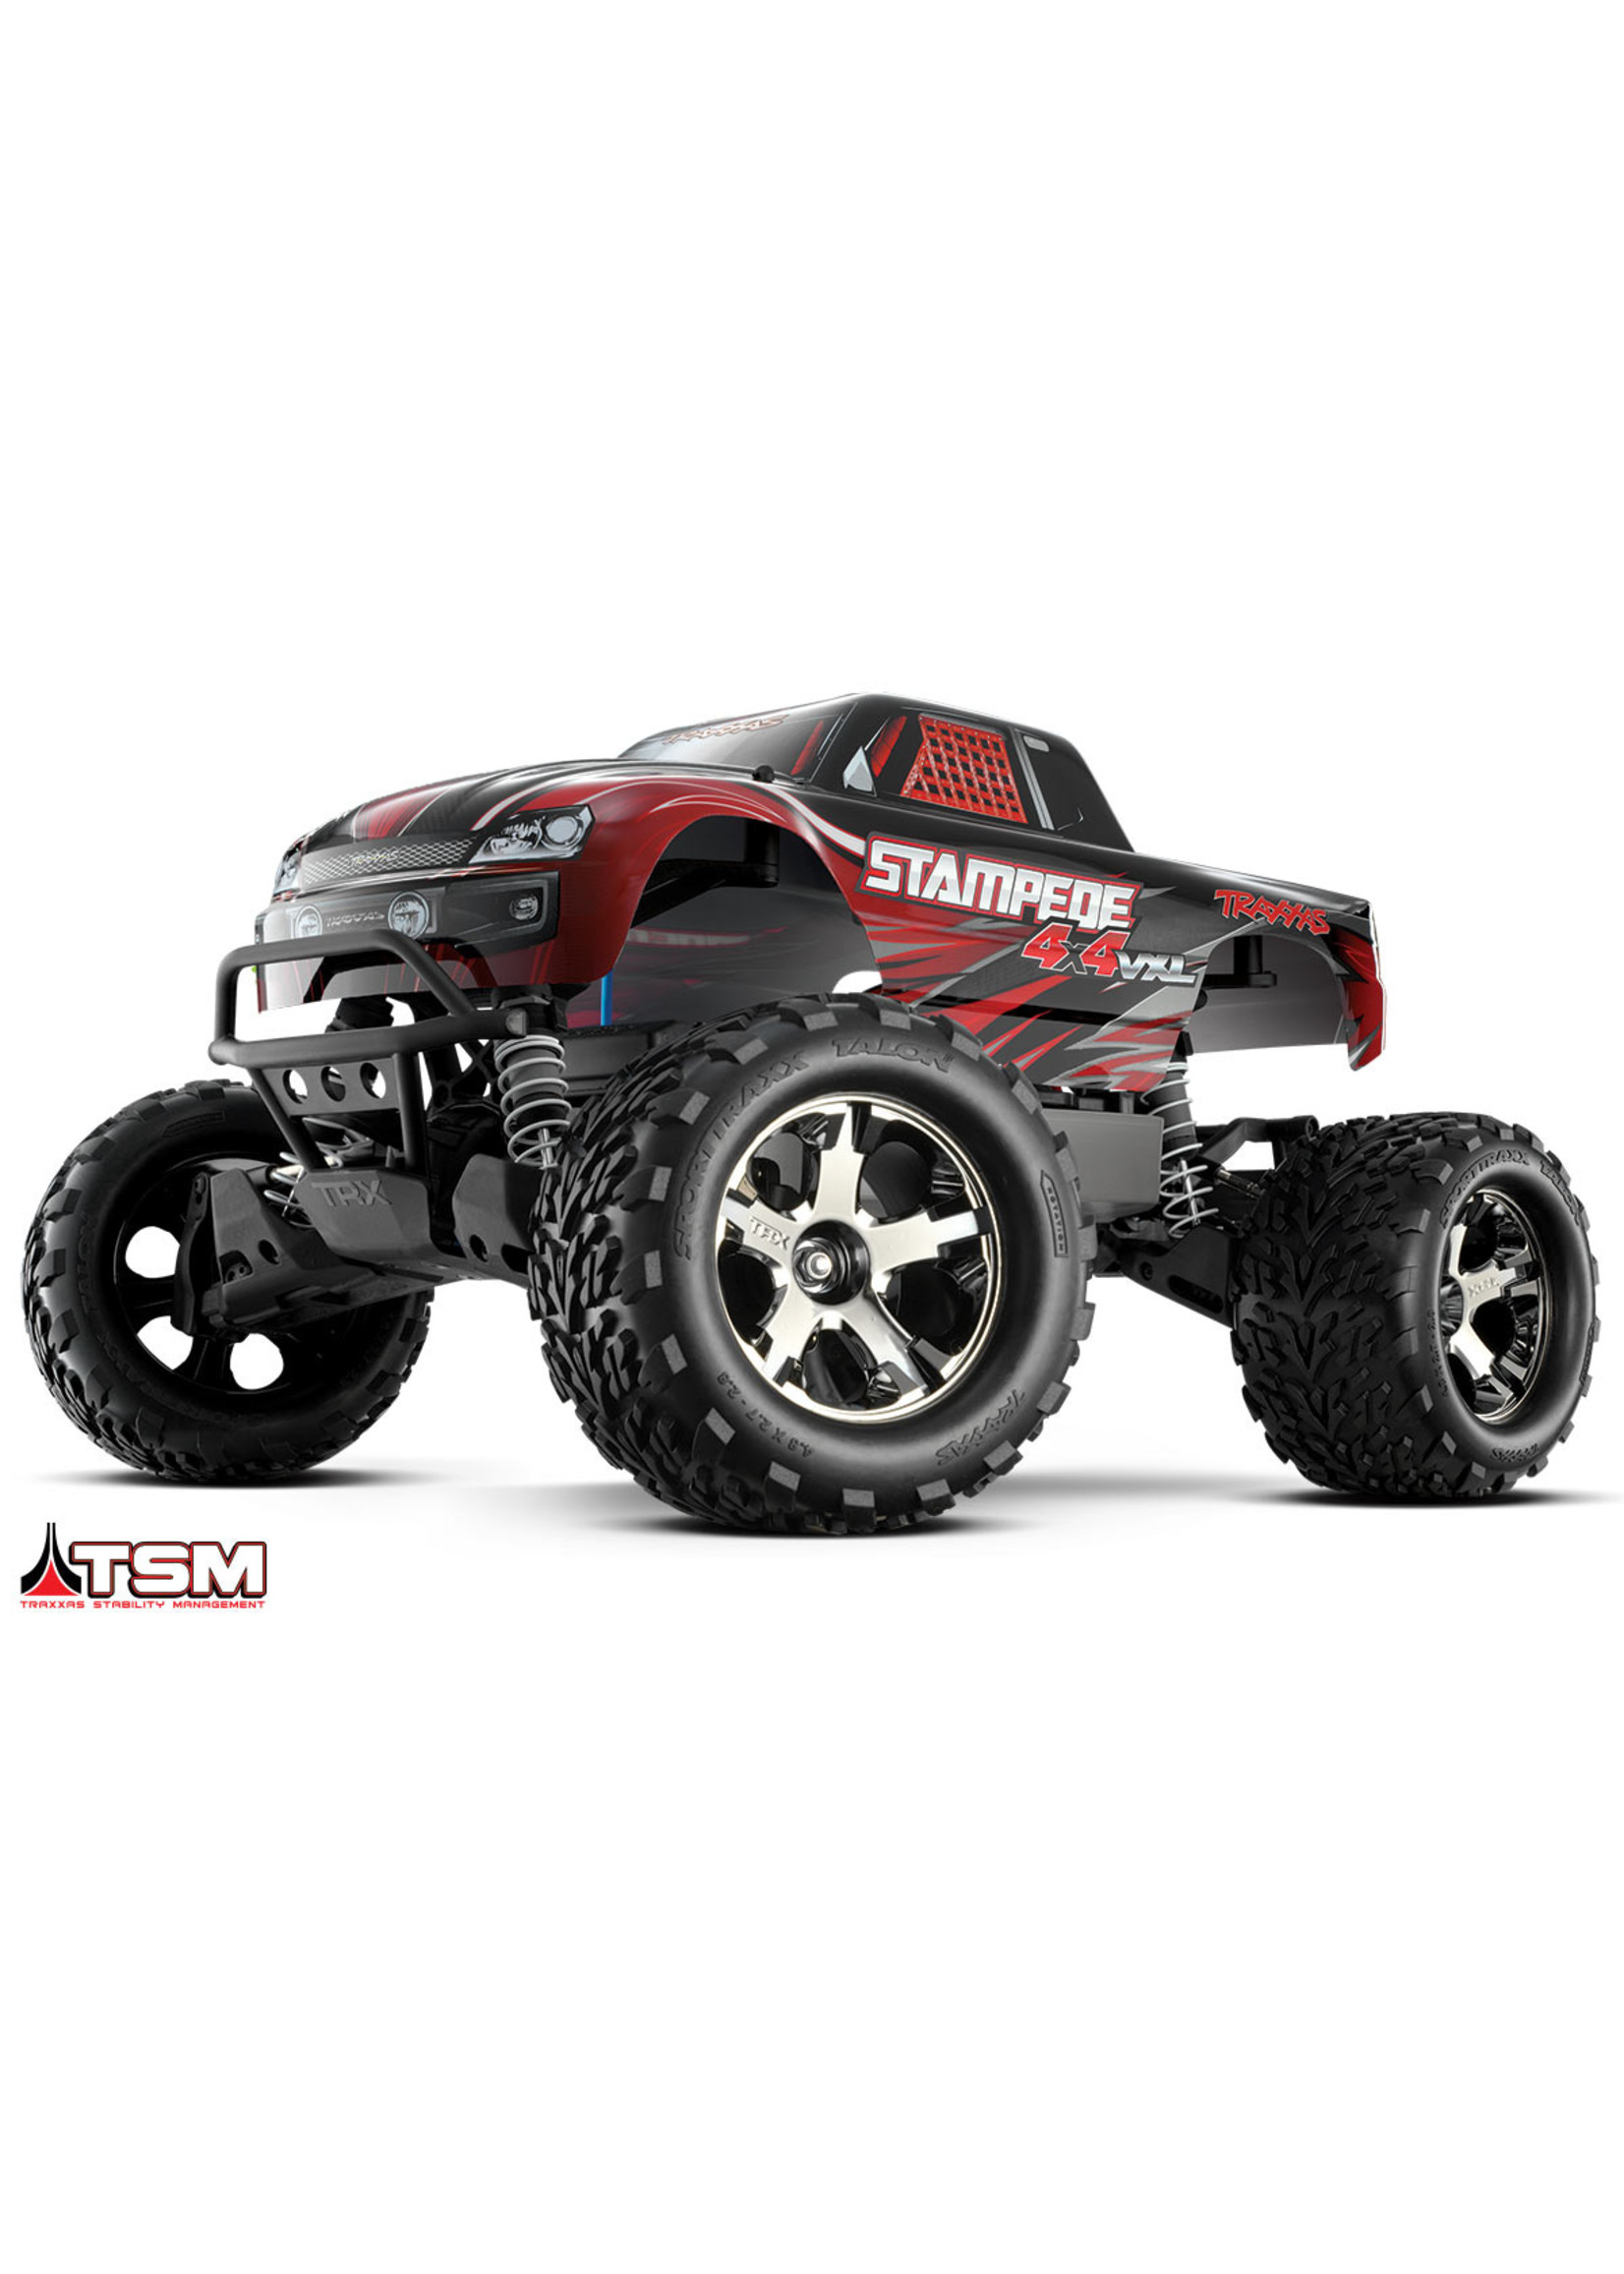 Traxxas 1/10 Stampede 4X4 VXL RTR Brushless 4WD Monster Truck - Red